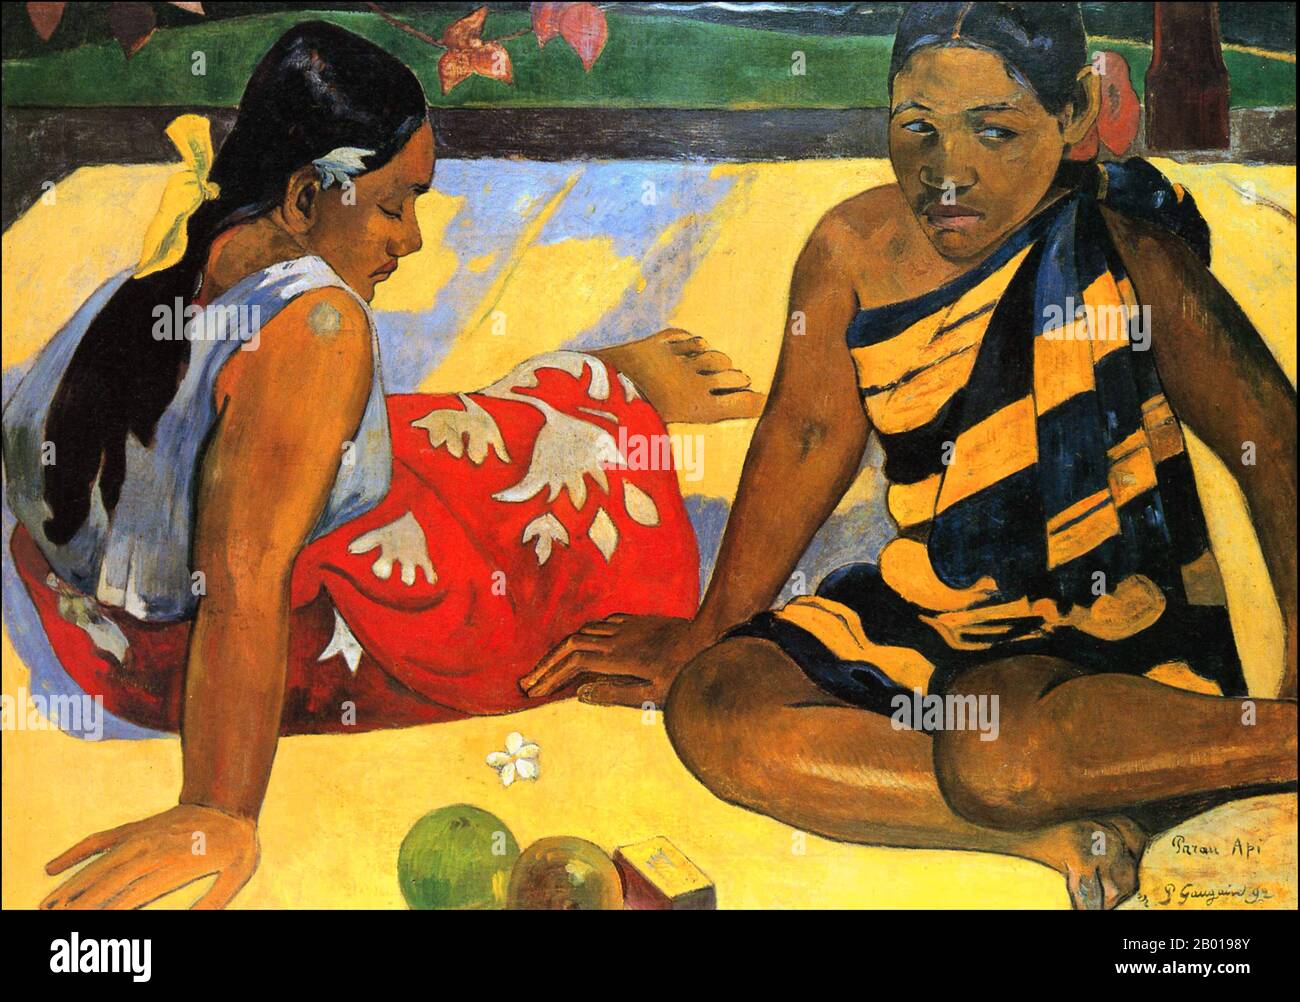 Tahiti: 'Parau Api' (What's New?, Two Women Of Tahiti). Oil on canvas painting by Paul Gauguin (7 June 1848 - 8 May 1903), 1892.  Paul Gauguin was born in Paris in 1848 and spent some of his childhood in Peru. He worked as a stockbroker with little success, and suffered from bouts of severe depression. He also painted. In 1891, Gauguin, frustrated by lack of recognition at home and financially destitute, sailed to the tropics to escape European civilization and 'everything that is artificial and conventional'. His time there was the subject of much interest both then and in modern times. Stock Photo